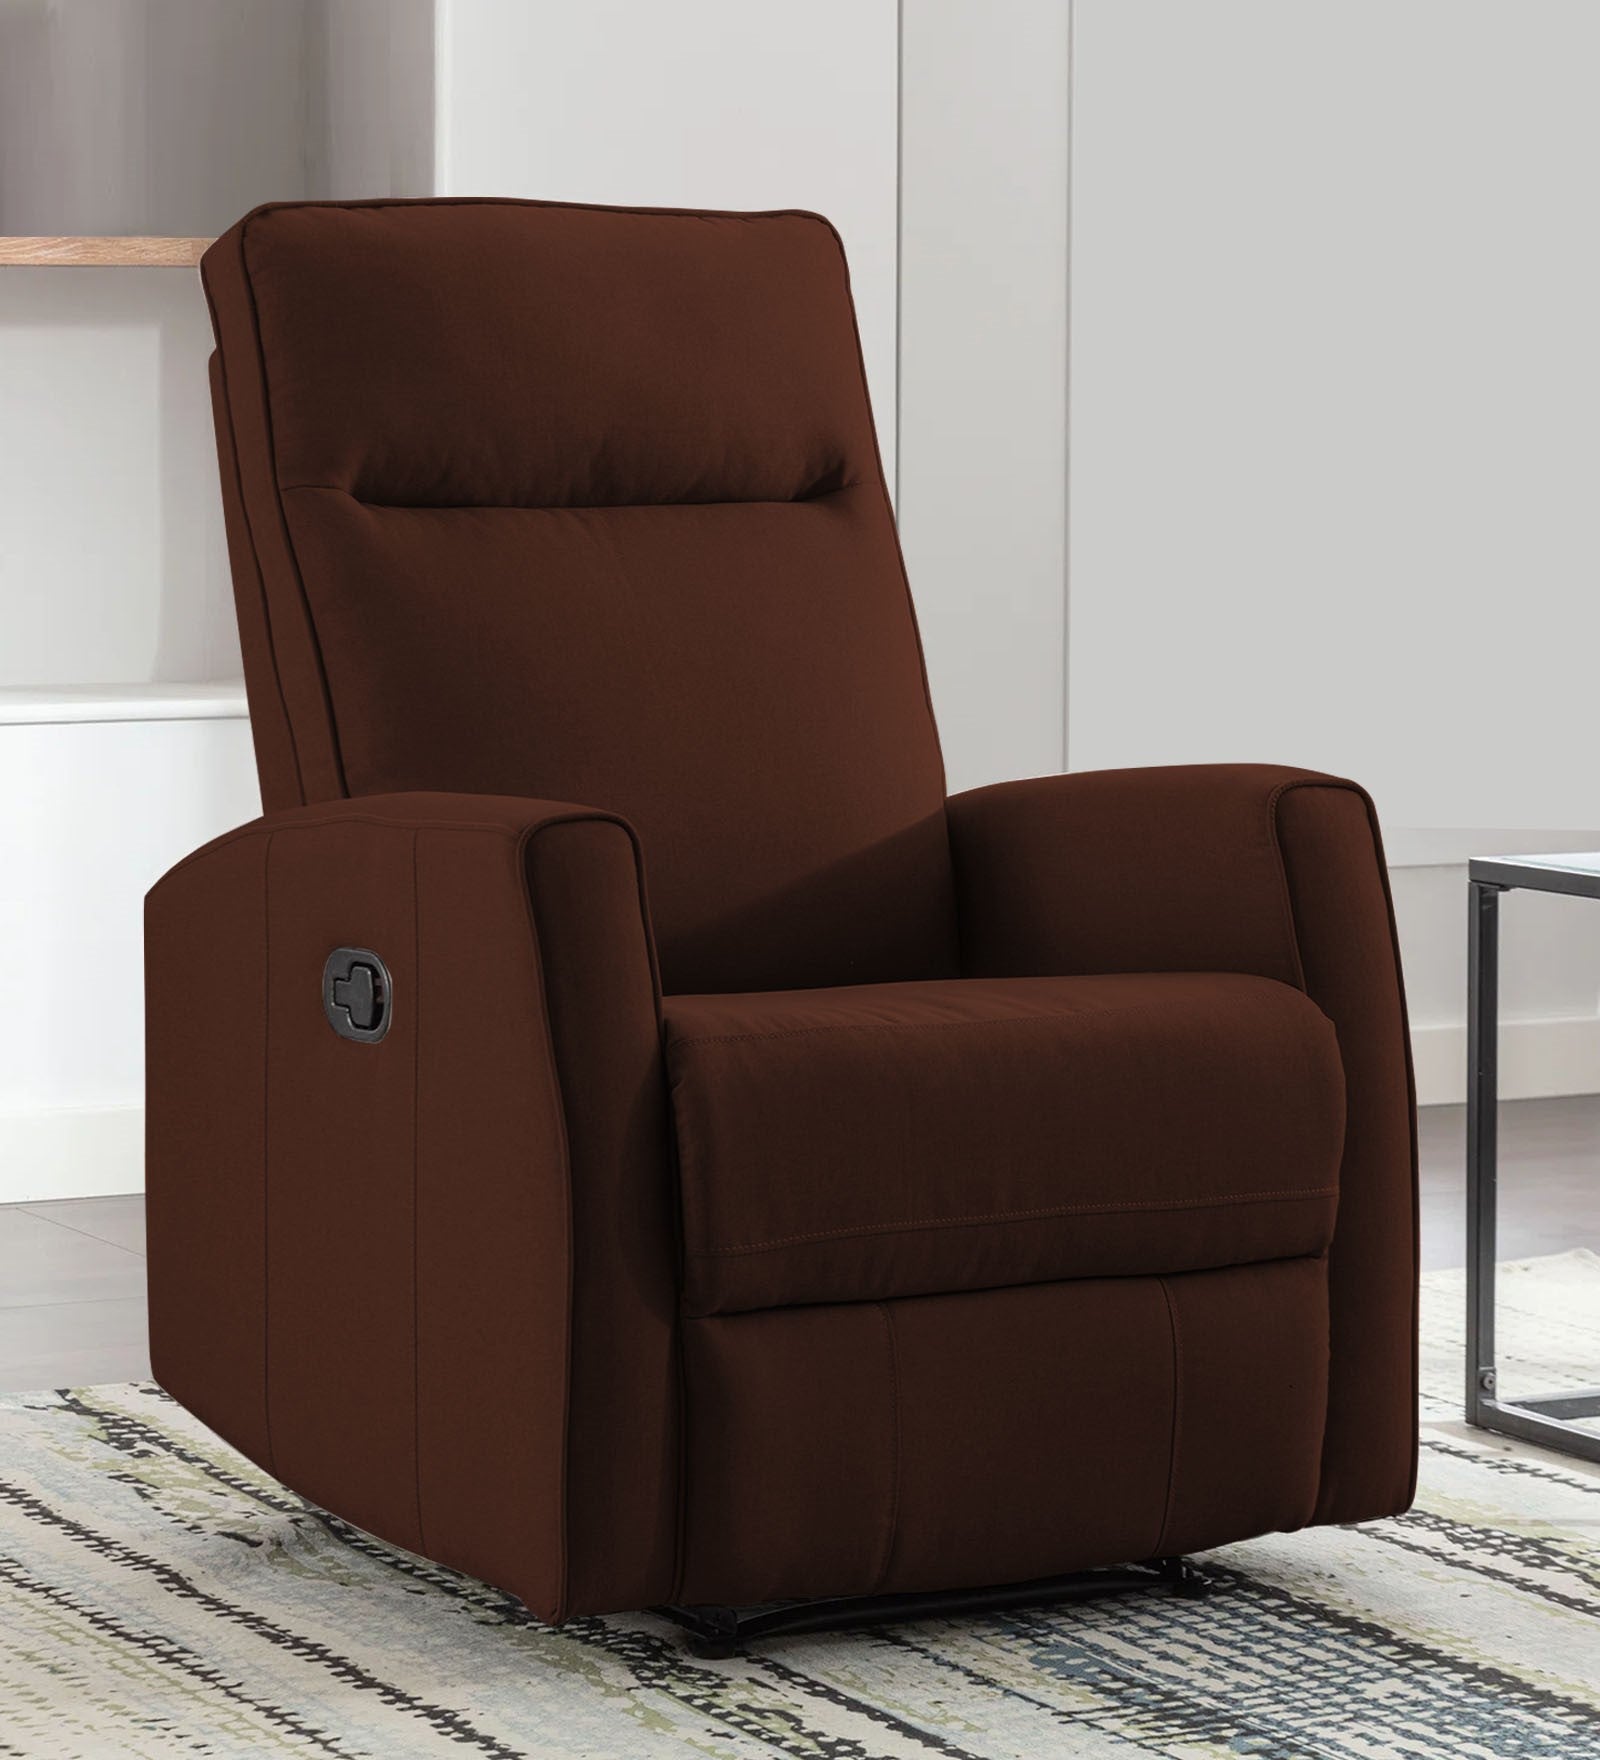 Logan Fabric Manual 1 Seater Recliner In Coffee Brown Colour